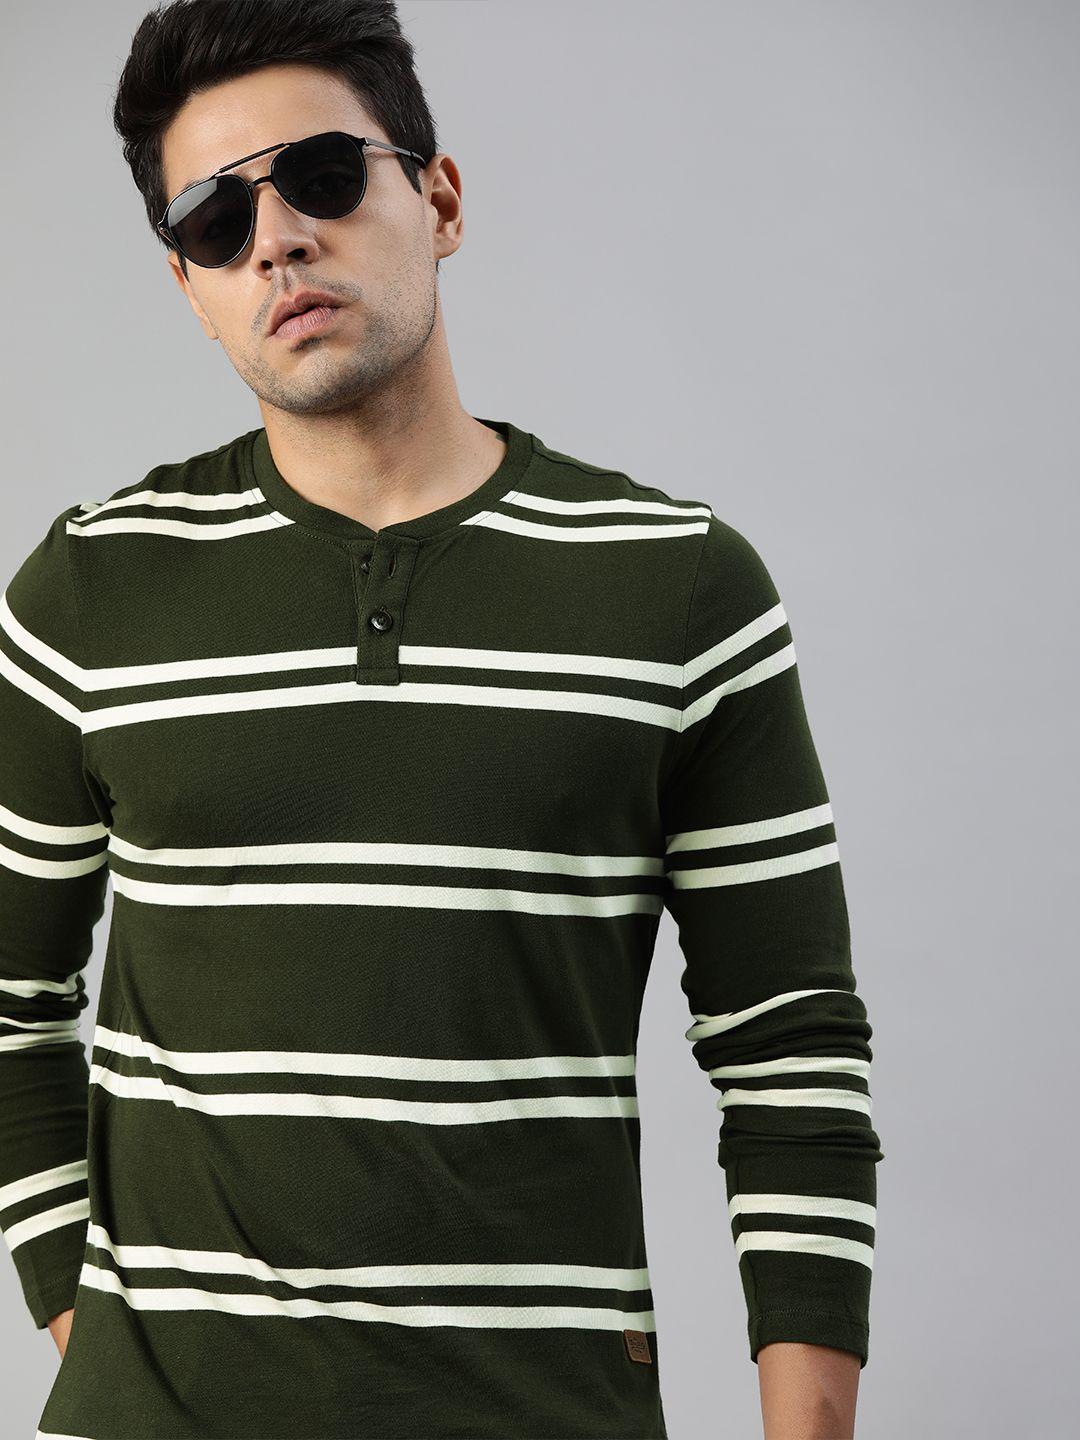 roadster men olive green  white striped henley neck pure cotton t-shirt